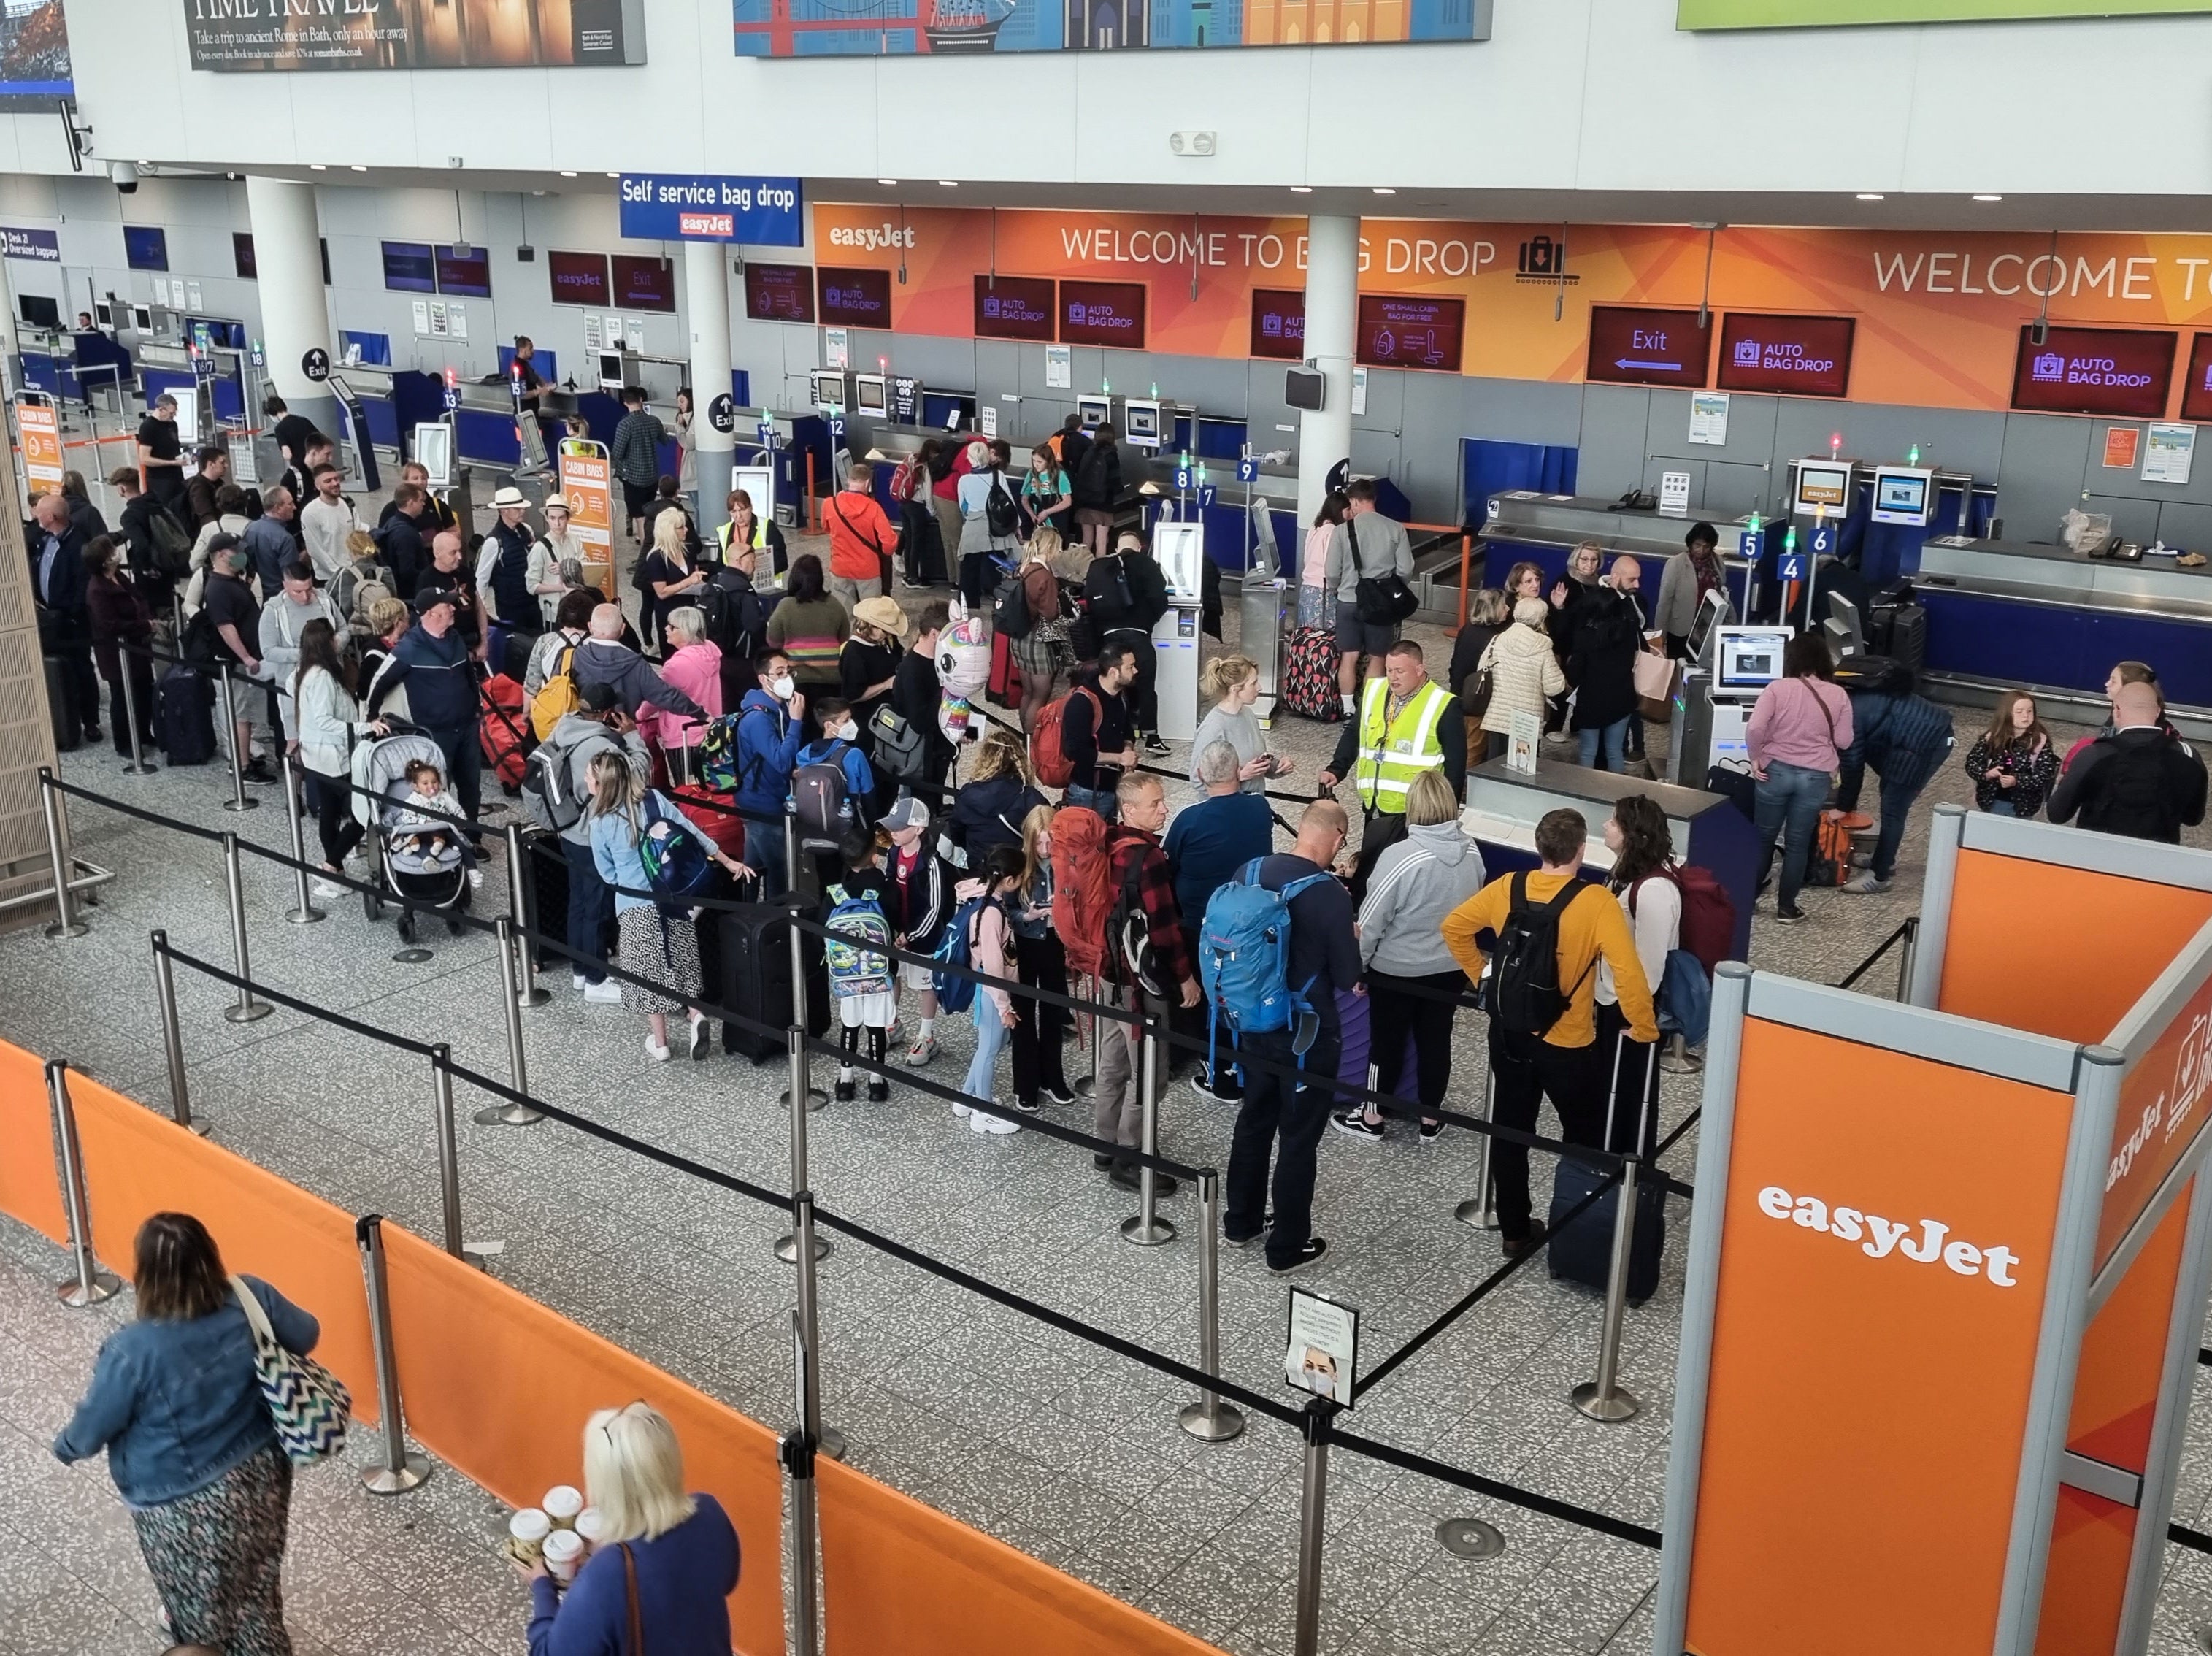 Queues at Bristol airport snaked out into a car park